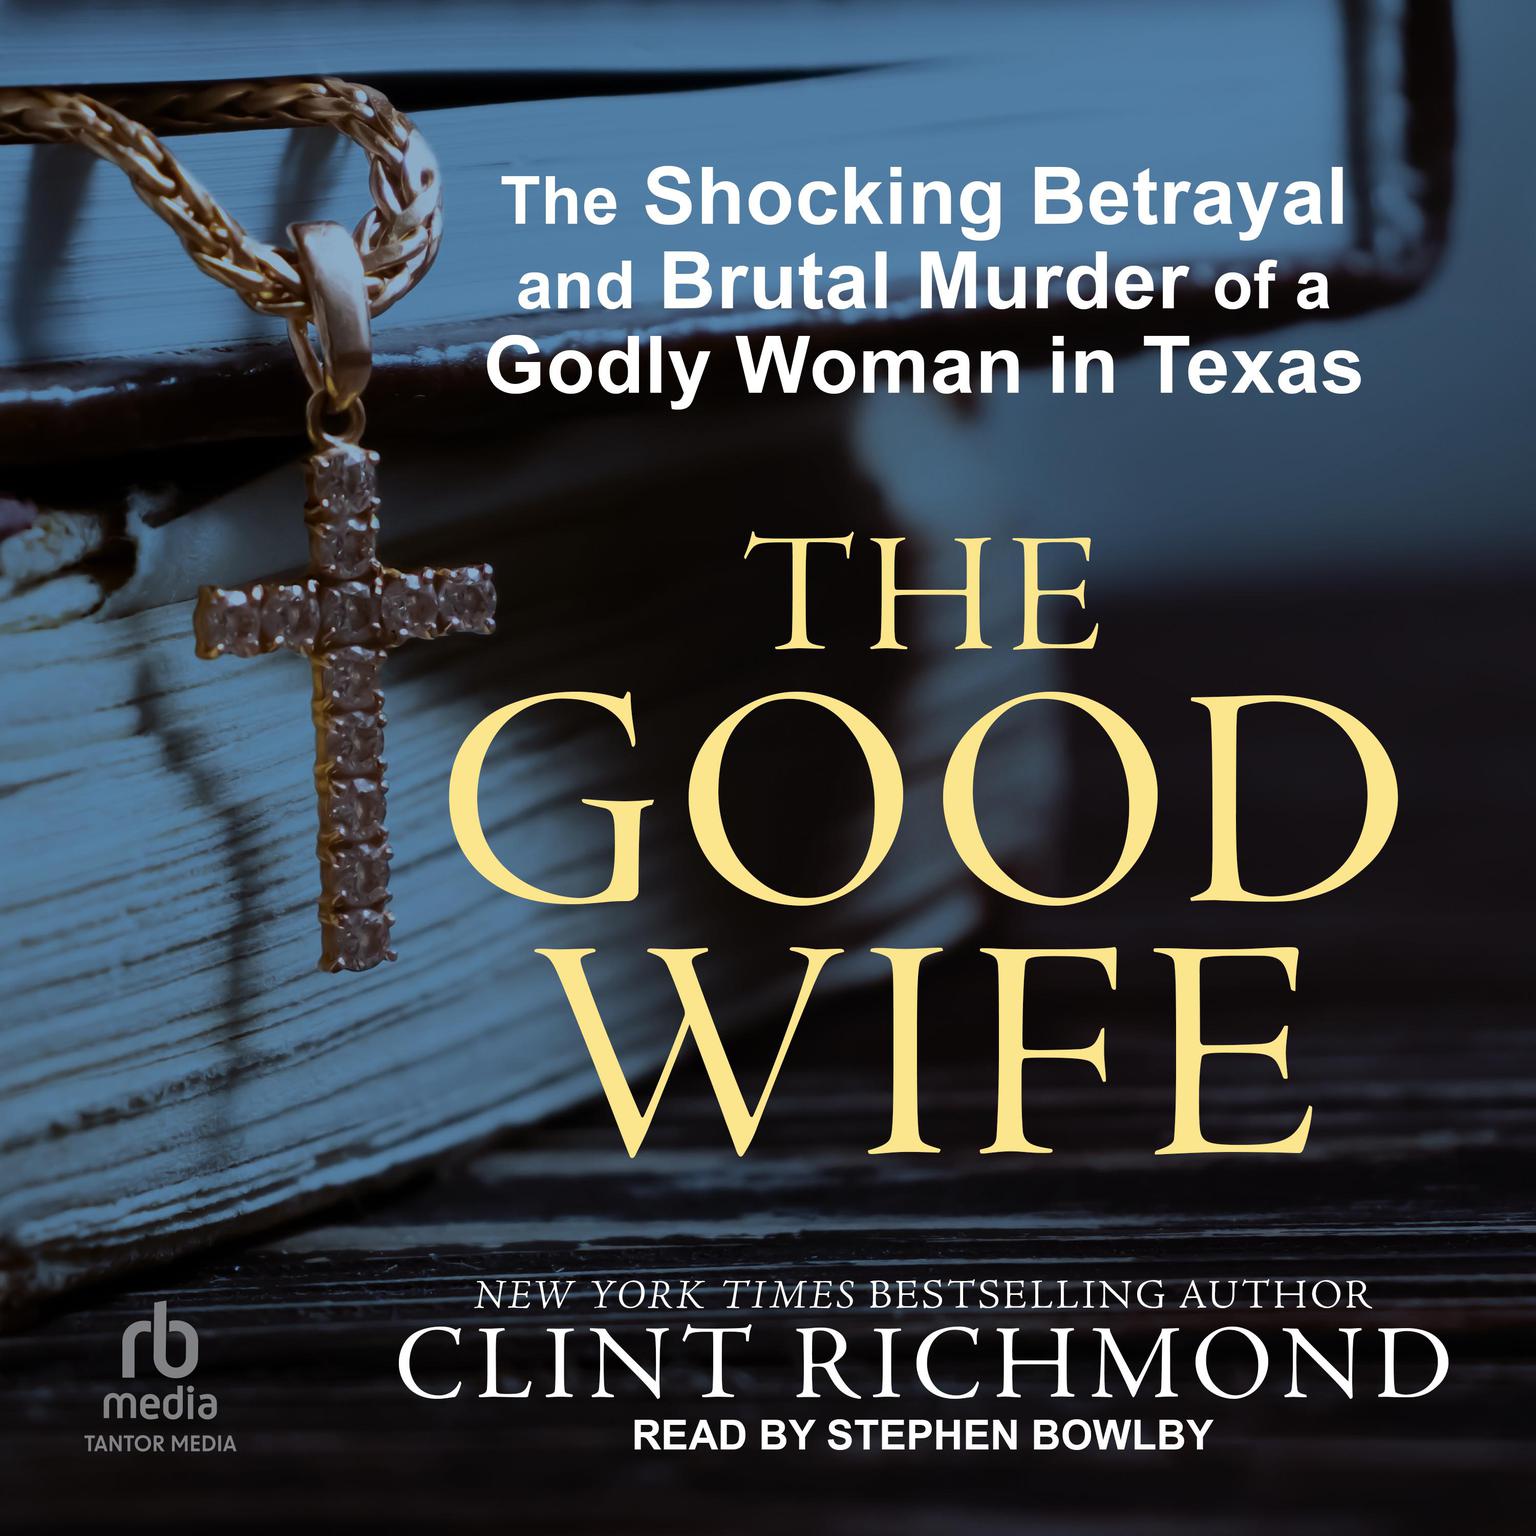 The Good Wife: The Shocking Betrayal and Brutal Murder of a Godly Woman in Texas Audiobook, by Clint Richmond